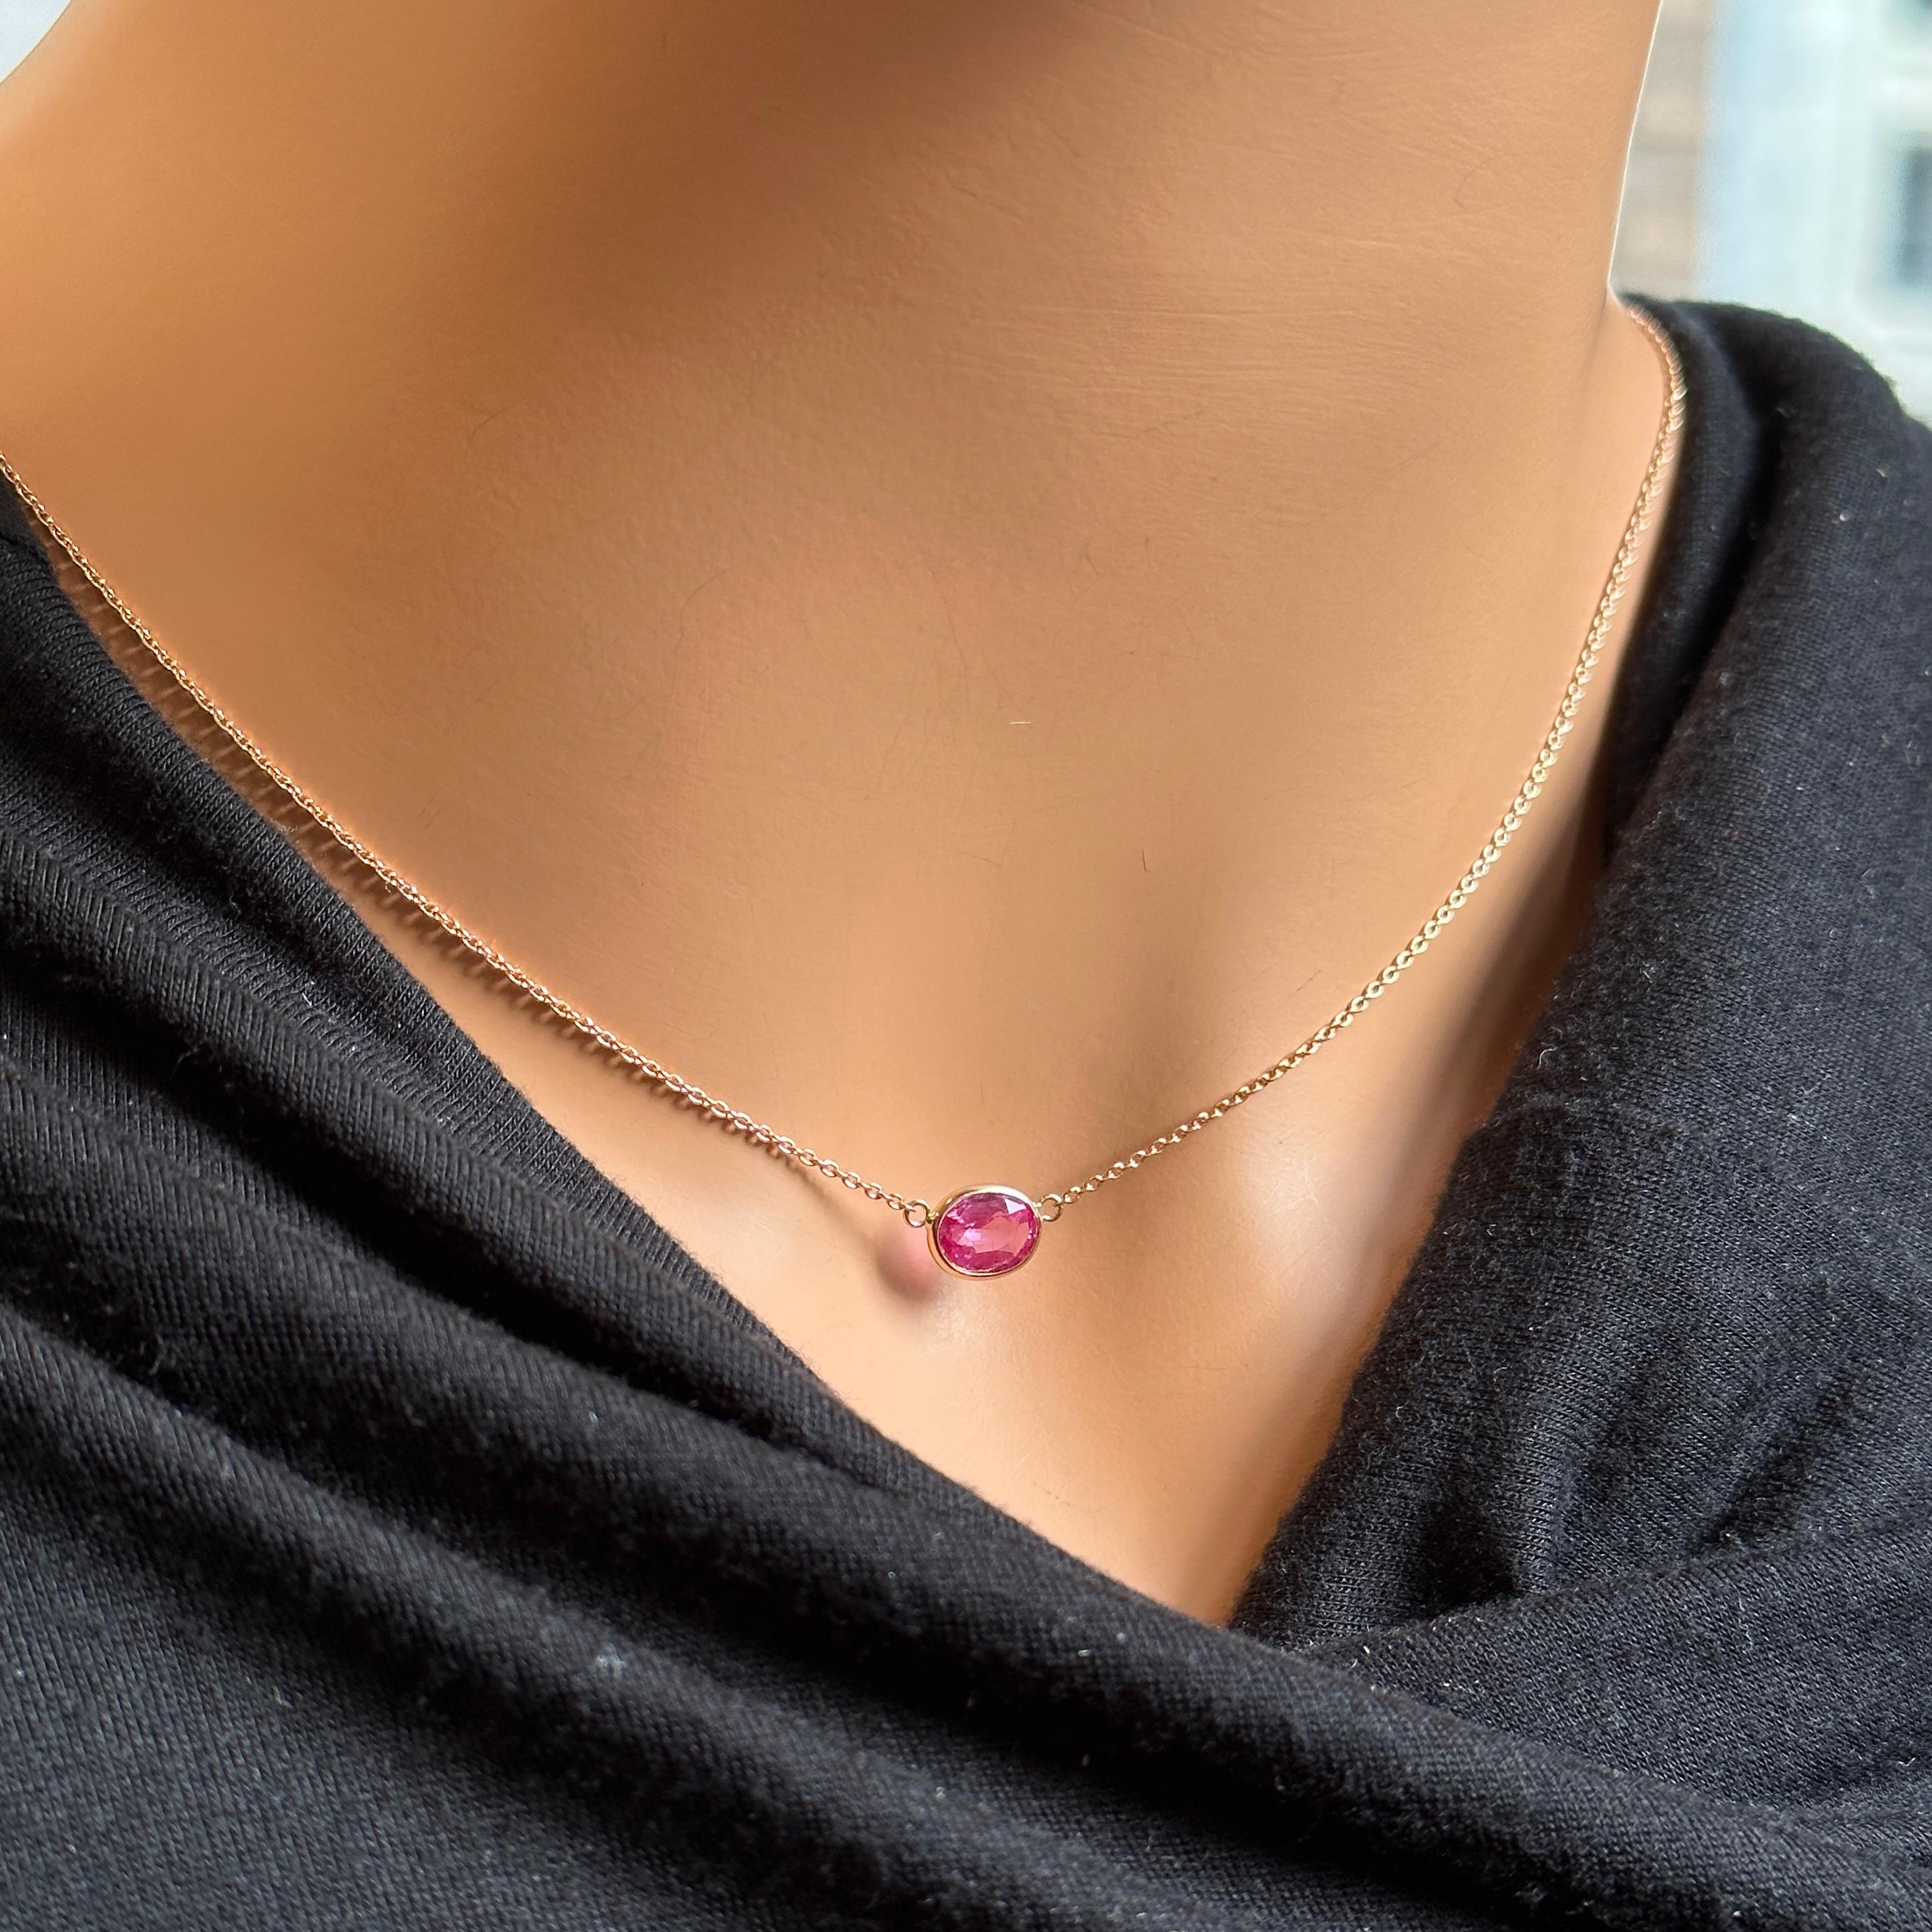 Taille ovale Collier solitaire en or rose 14 carats avec saphir rose de taille ovale de 1,43 carat en vente